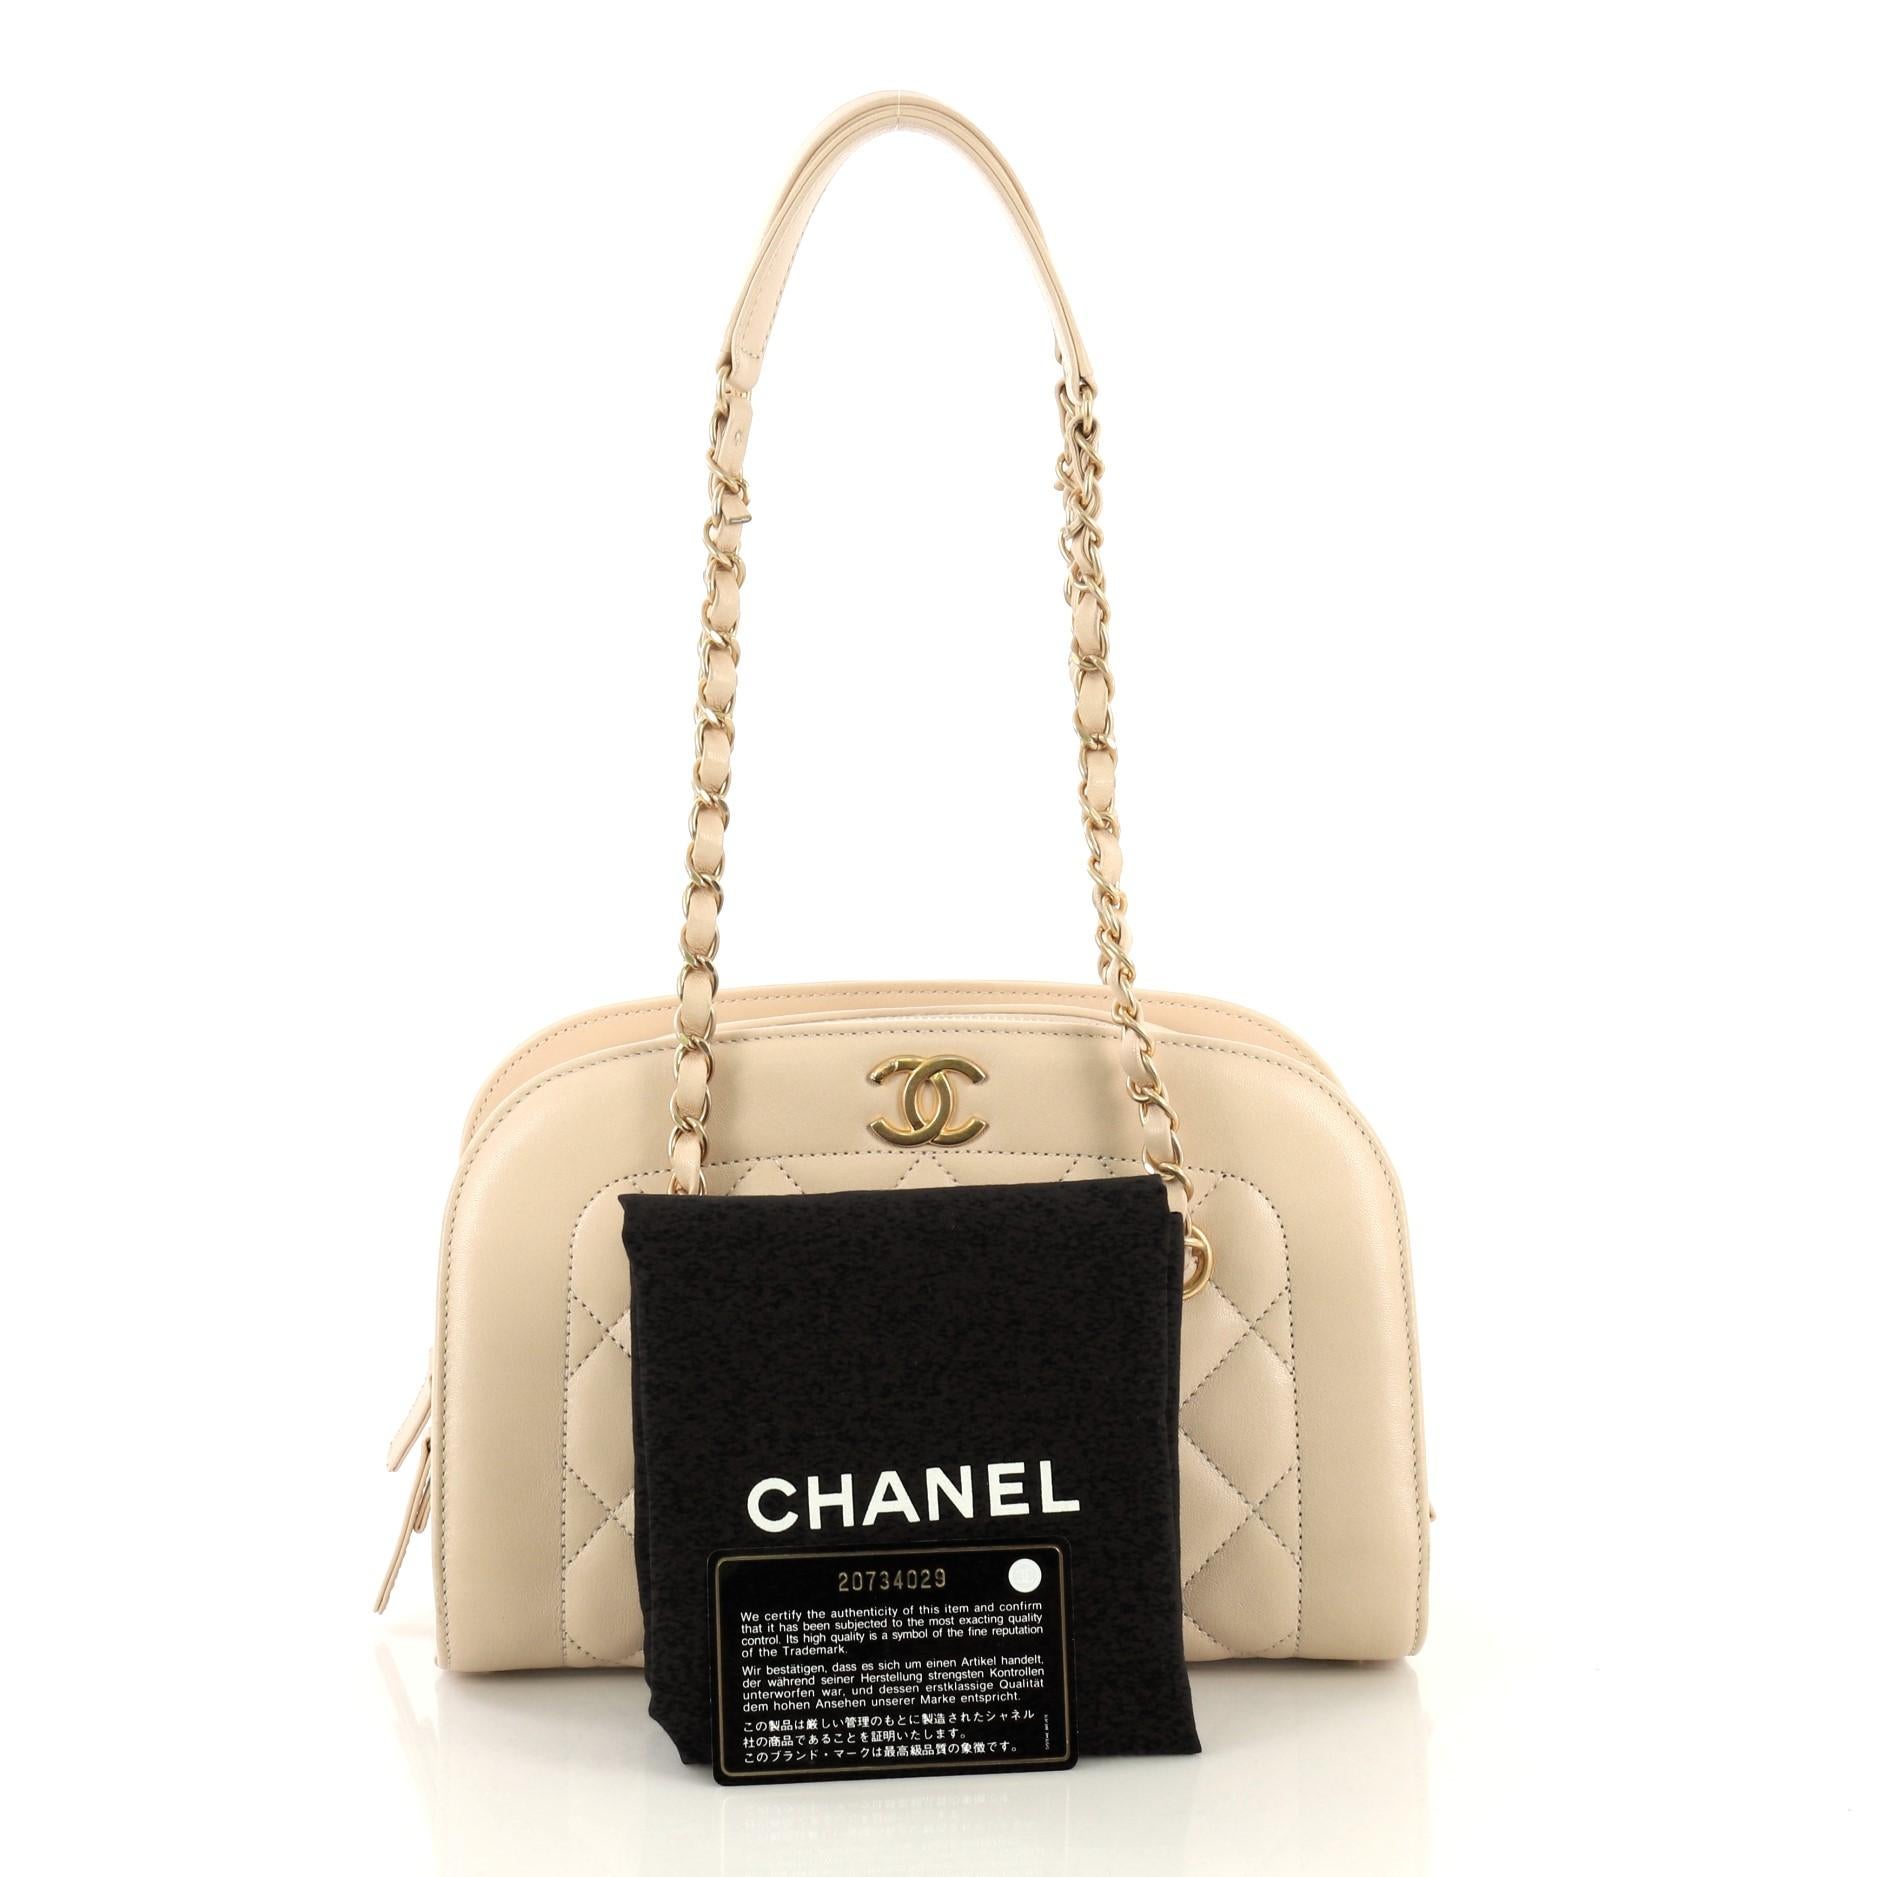 This Chanel Zip Around Chain Camera Bag Quilted Lambskin Medium, crafted in neutral leather, features woven-in leather chain straps with leather pad, CC logo at front and matte gold-tone hardware. Its zip-around closure opens to a red leather